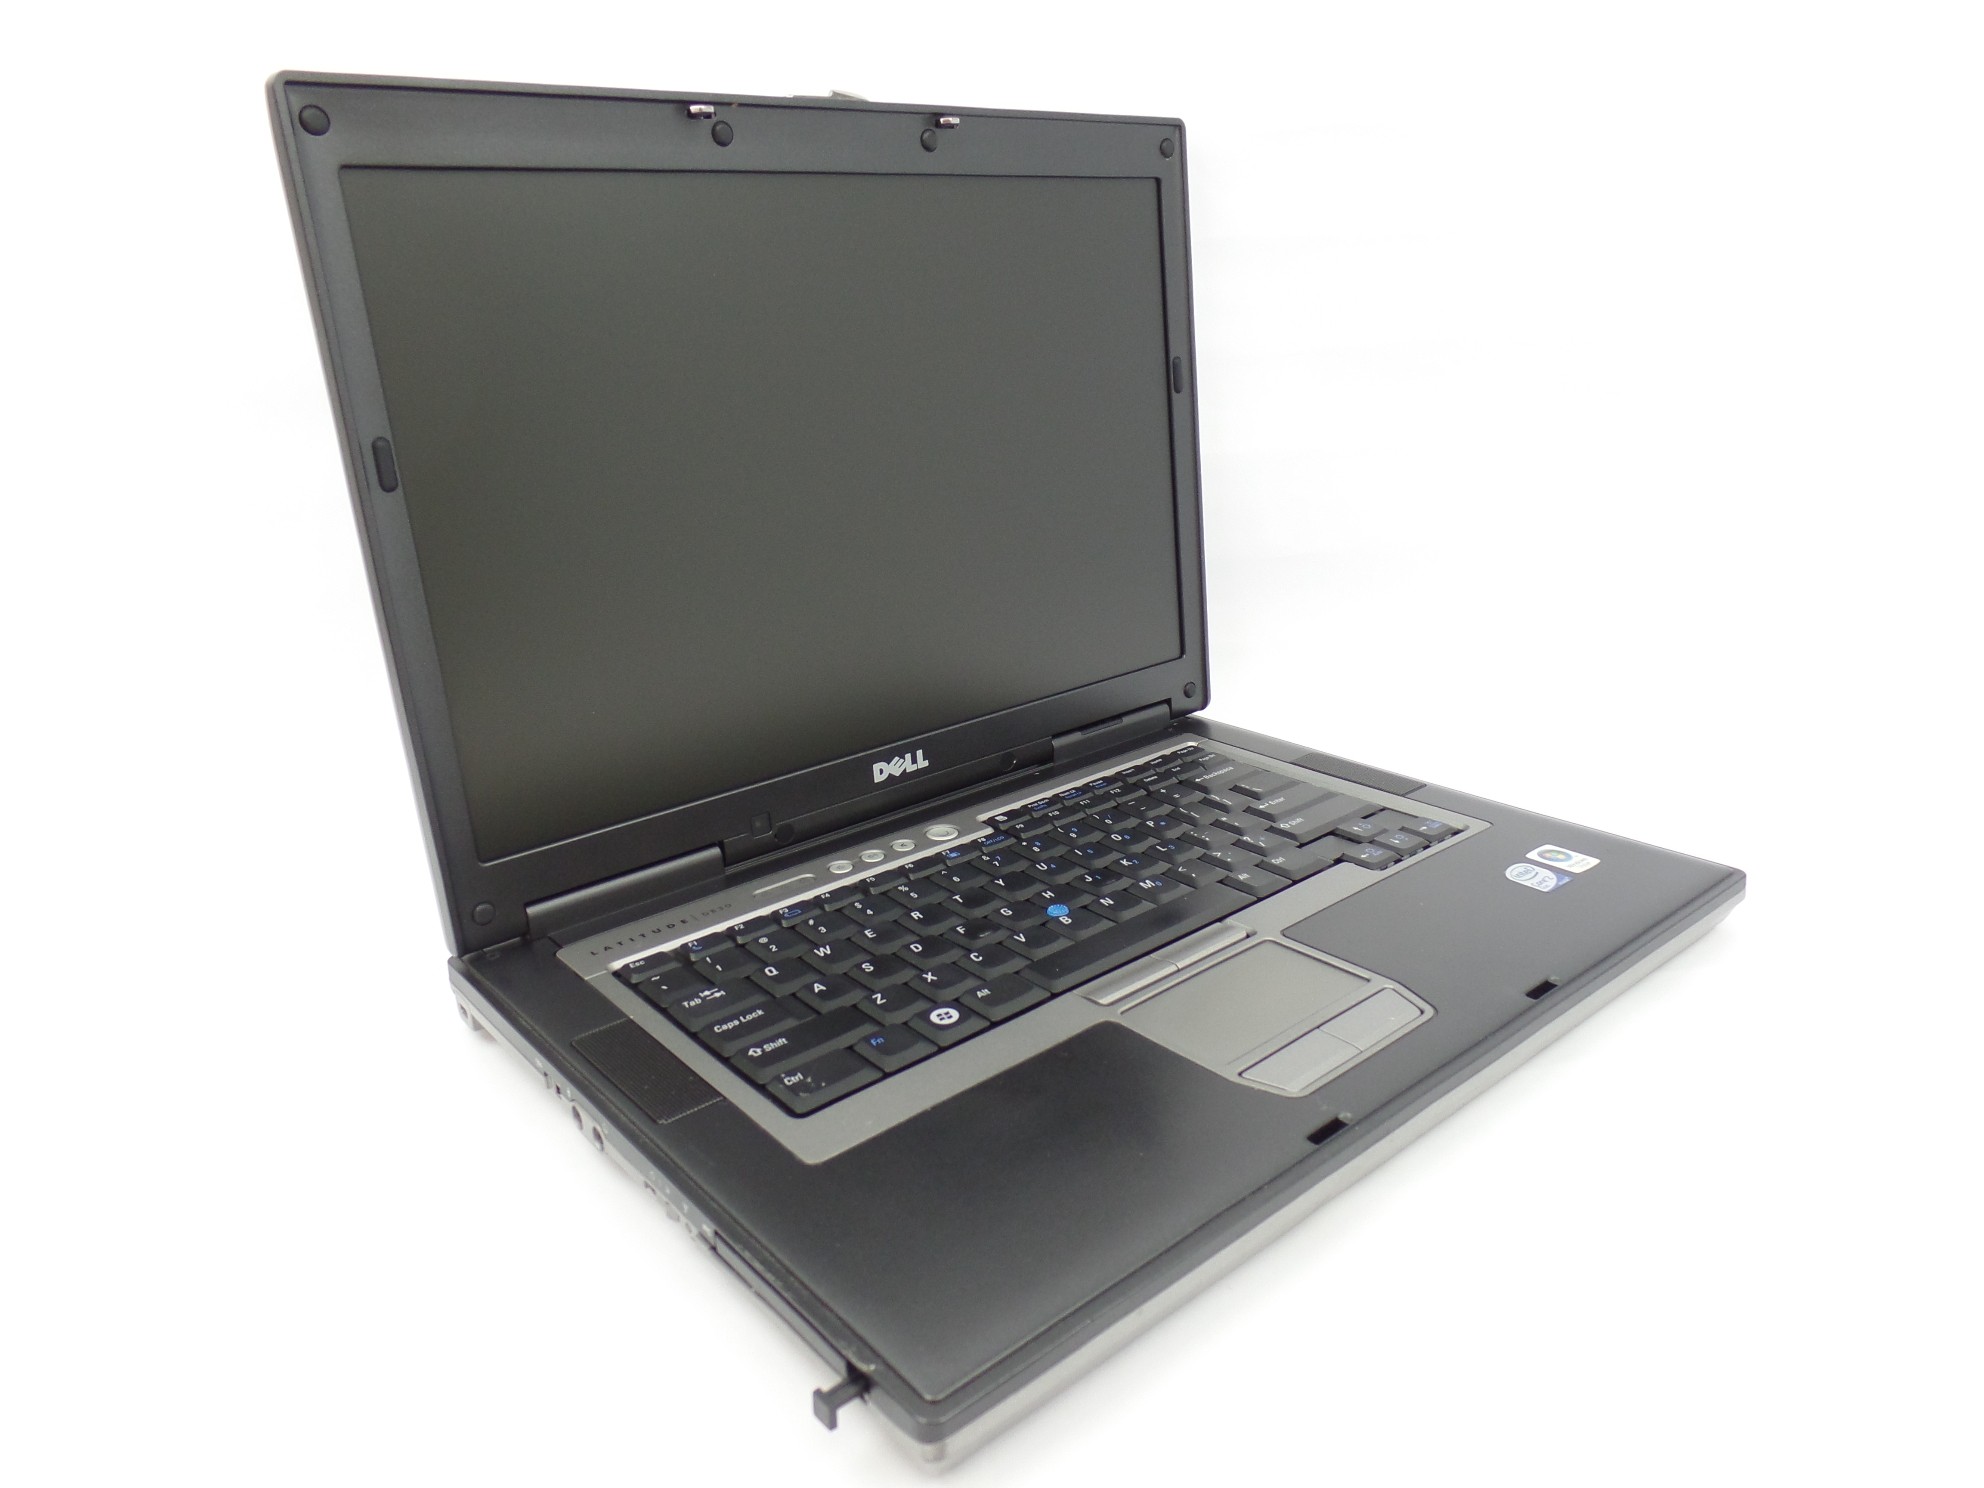 Dell Latitude D830 15" Core 2 Duo 2.5GHz 2GB RAM No HDD No WebCam Boots to BIOS